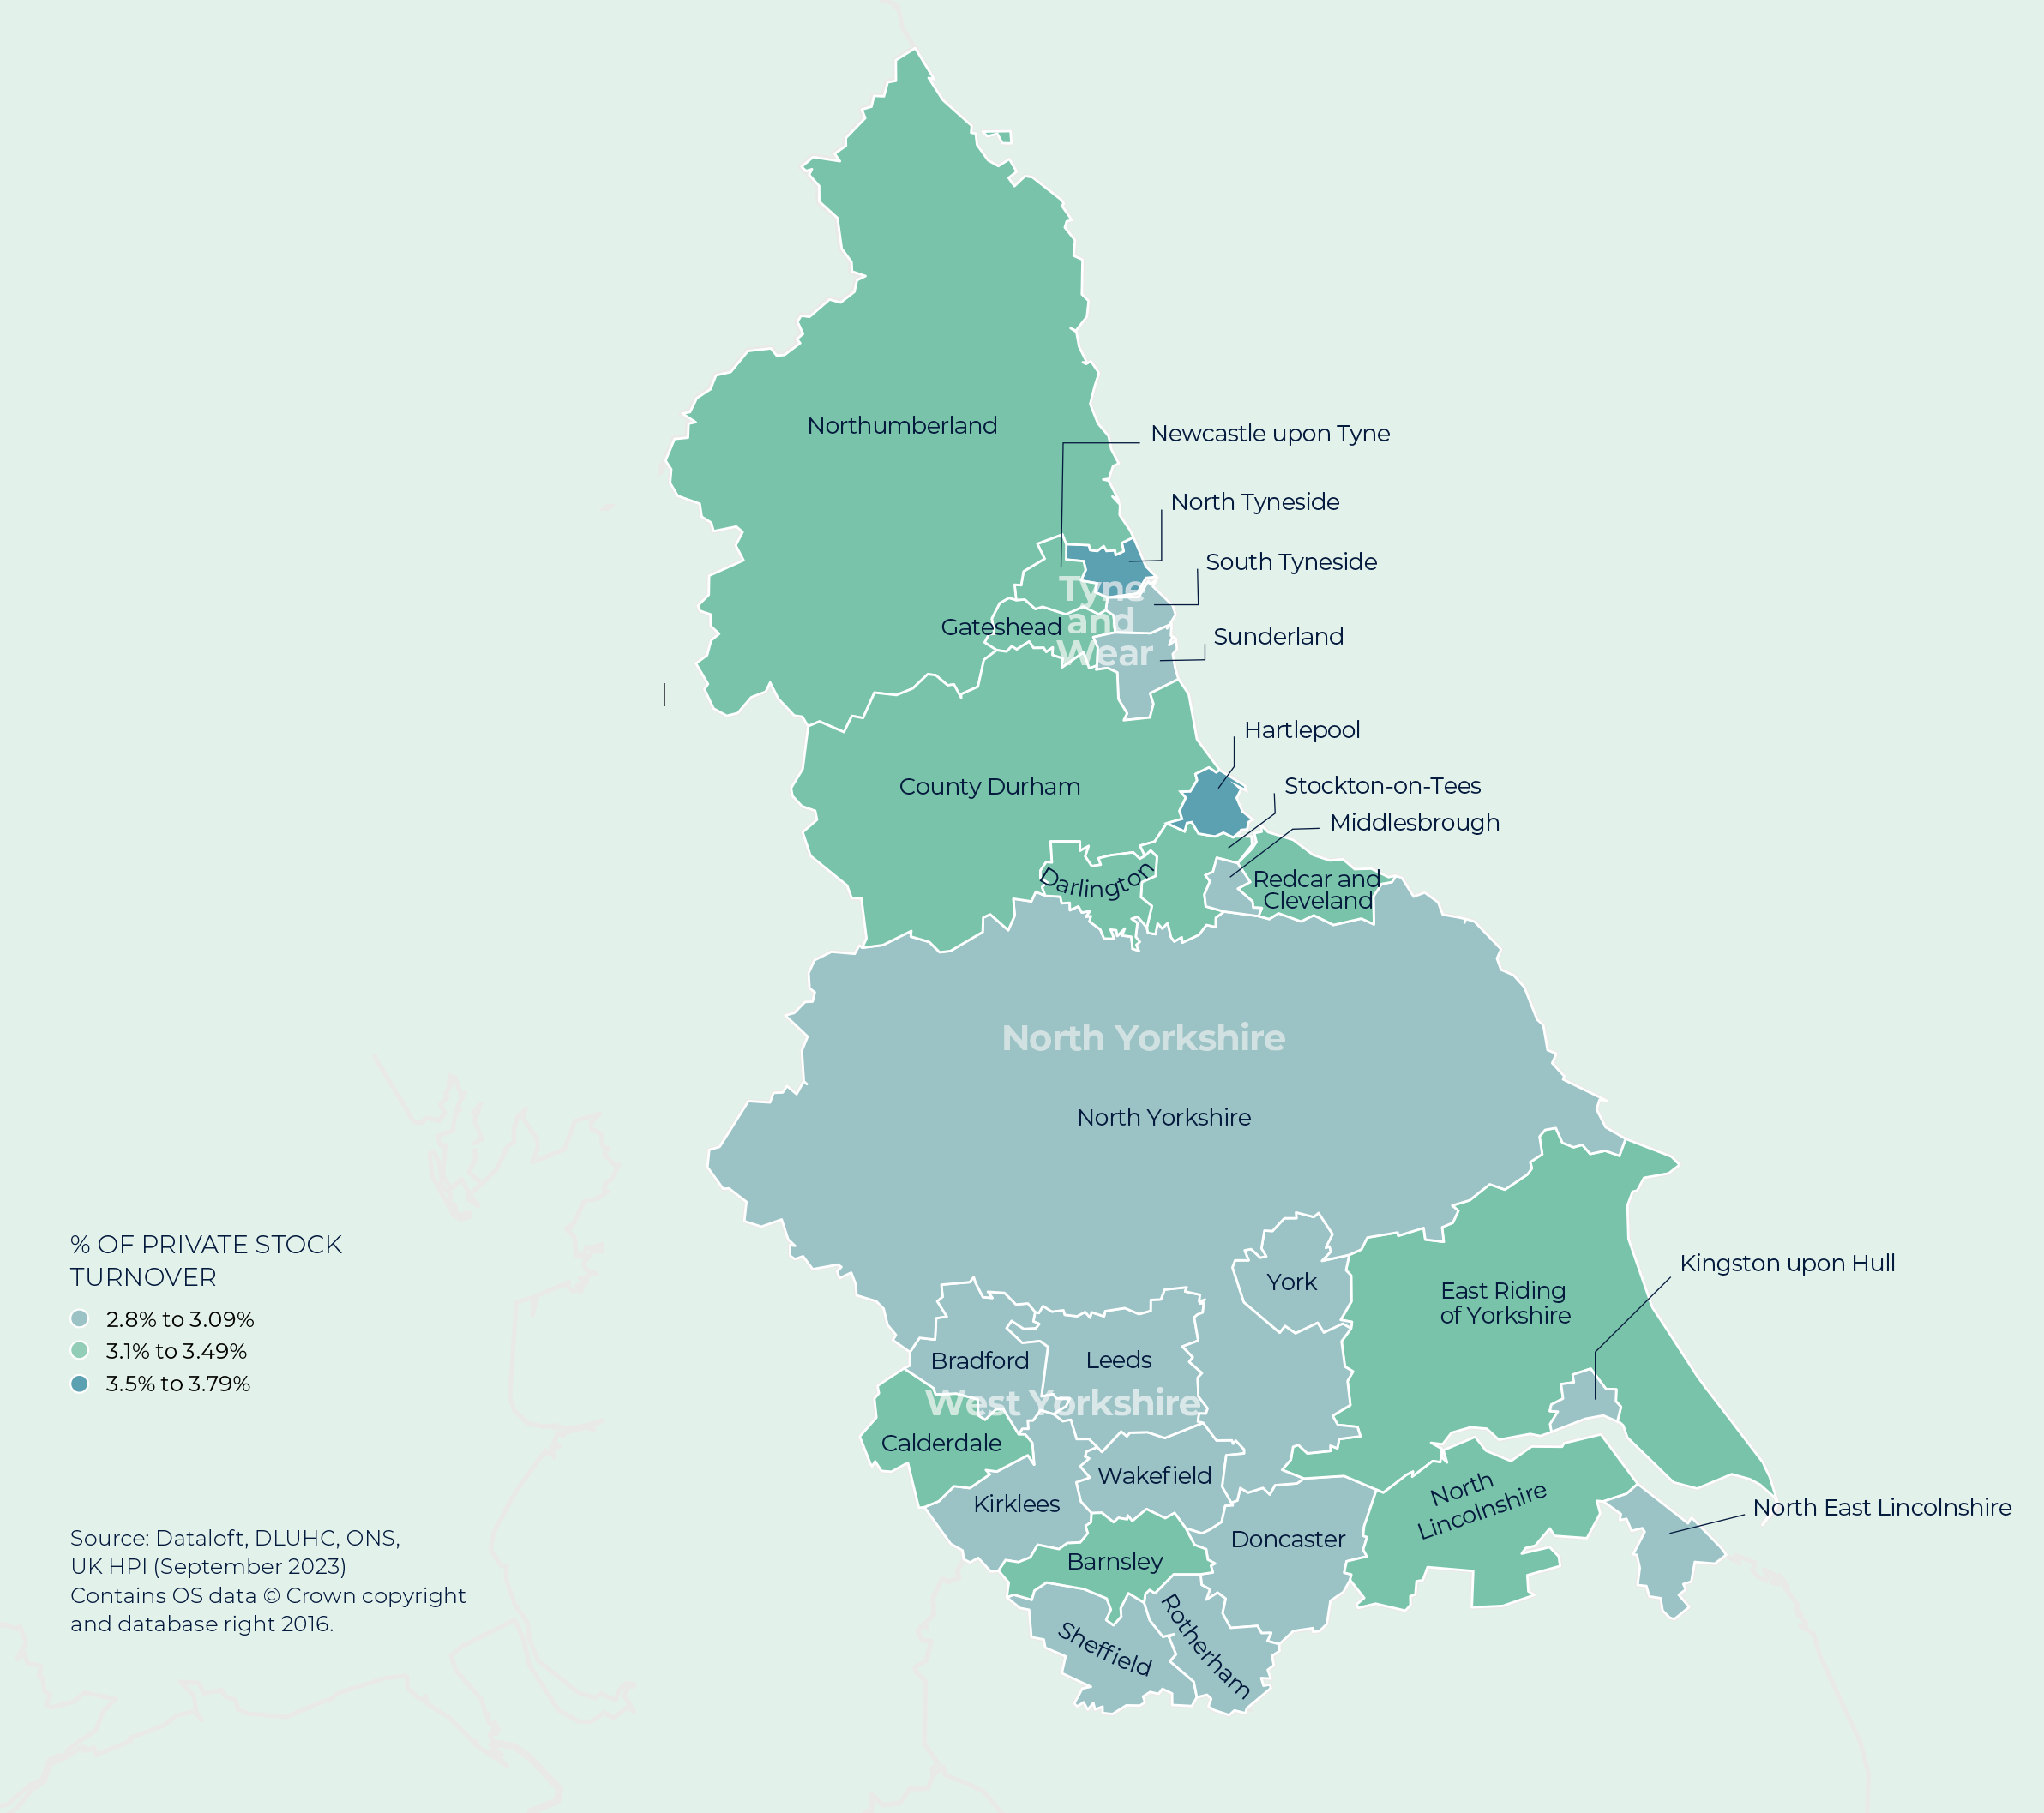 North East Yorkshire and Humber